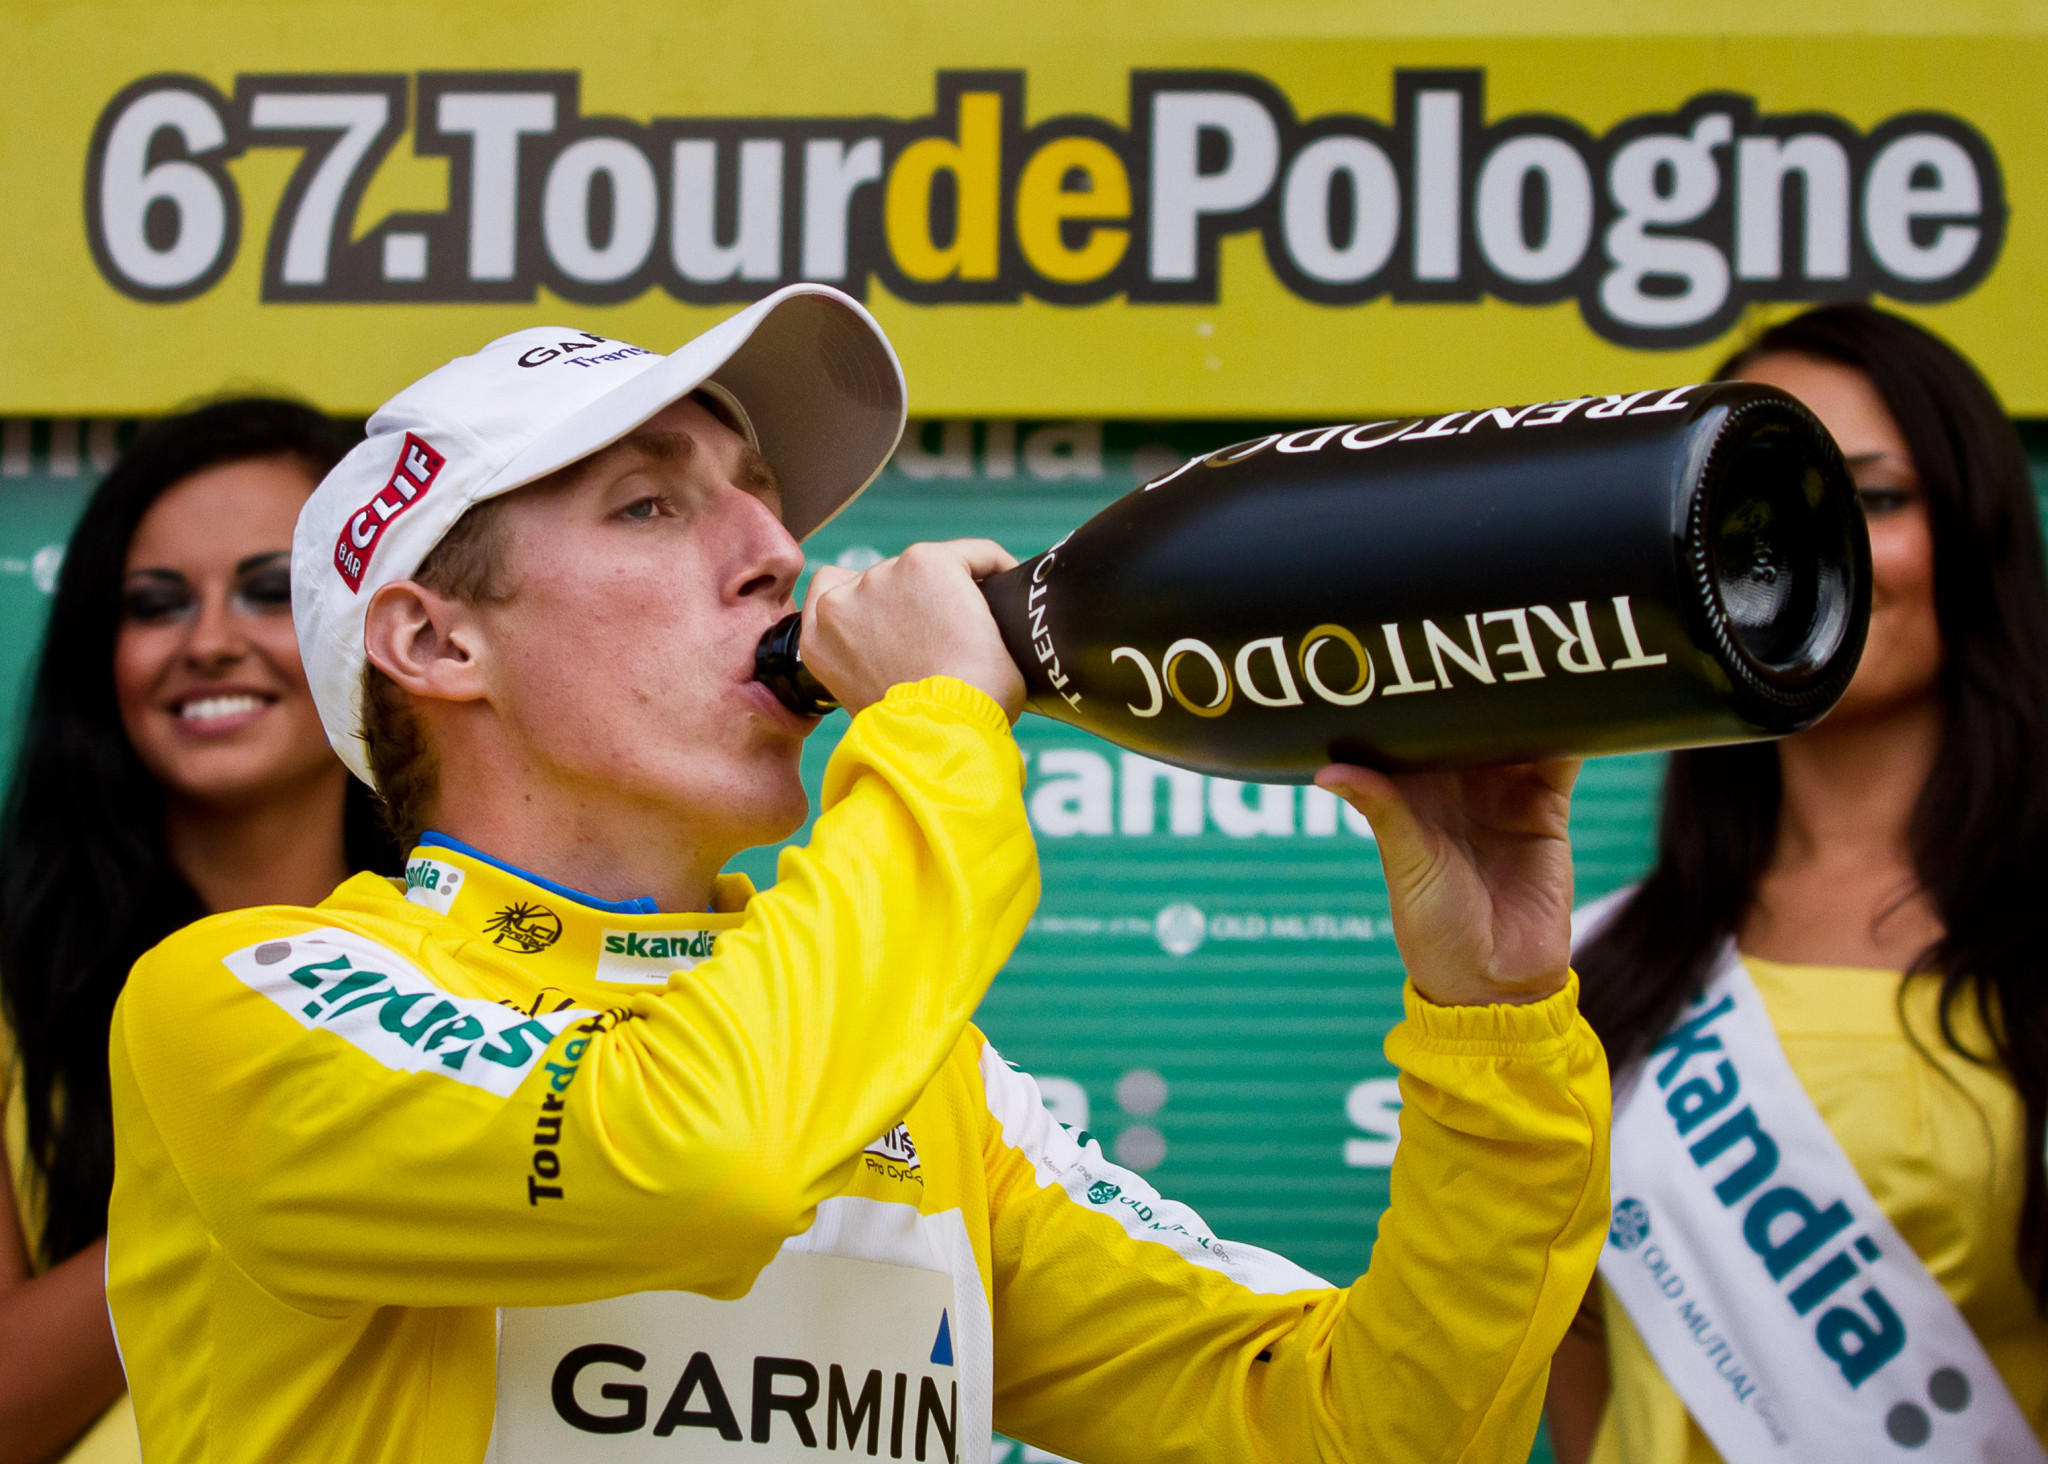 Ireland's Daniel Martin was the last person from the British Isles to win the Tour de Pologne, in 2010 ©Getty Images